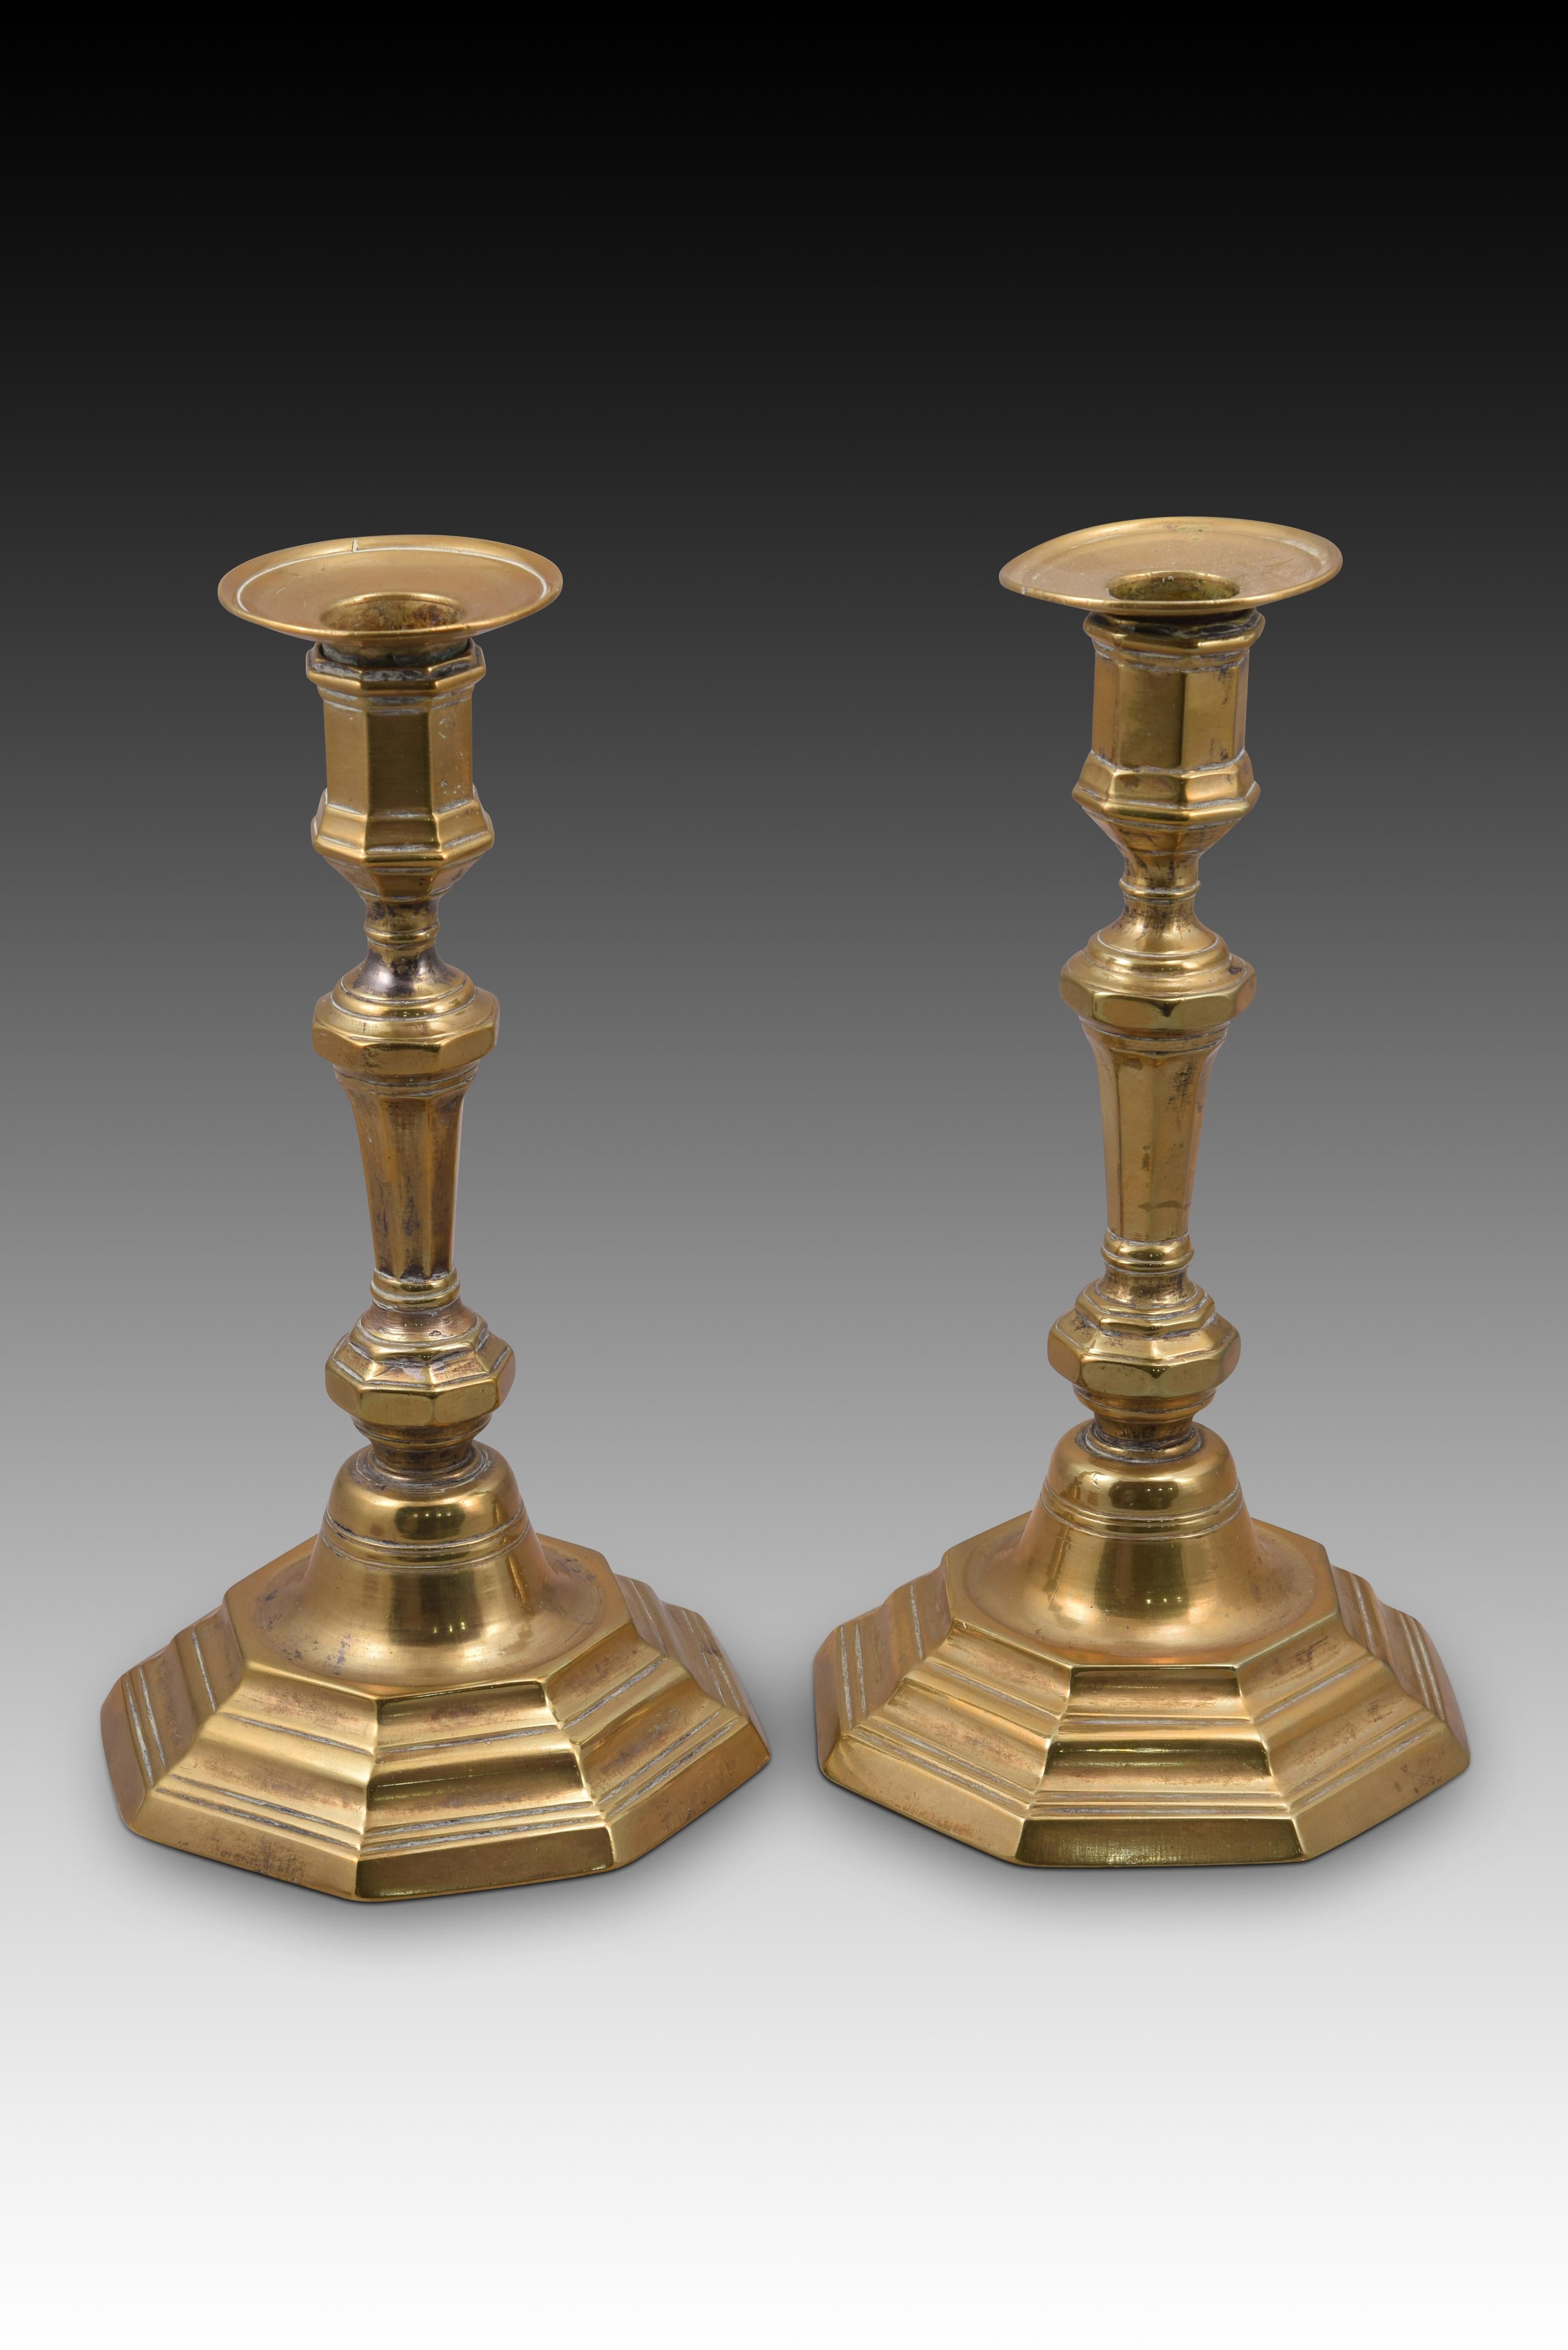 European Pair of candlesticks or candle holders. Bronze. 18th century. For Sale